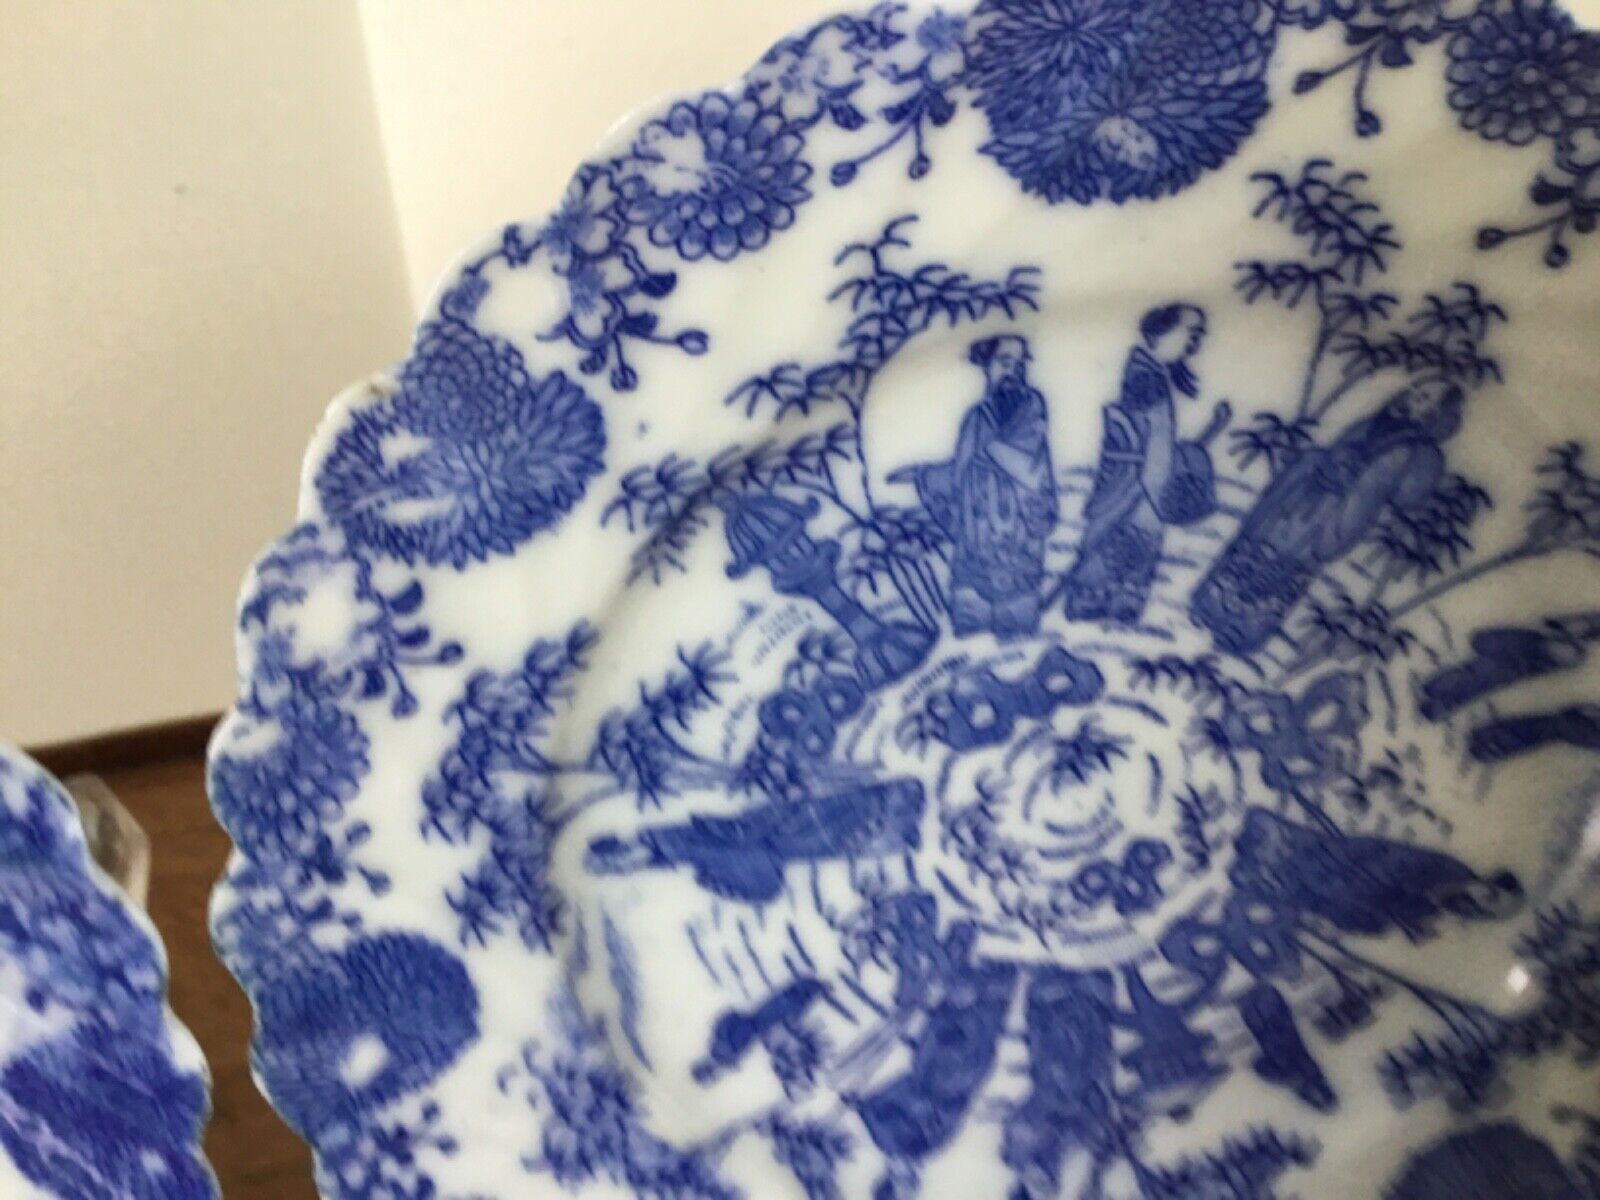  Antique Asian /Chines /Japanese 4 Blue & White Plates Decorated w Sages 6 1/4” Без бренда - фотография #11